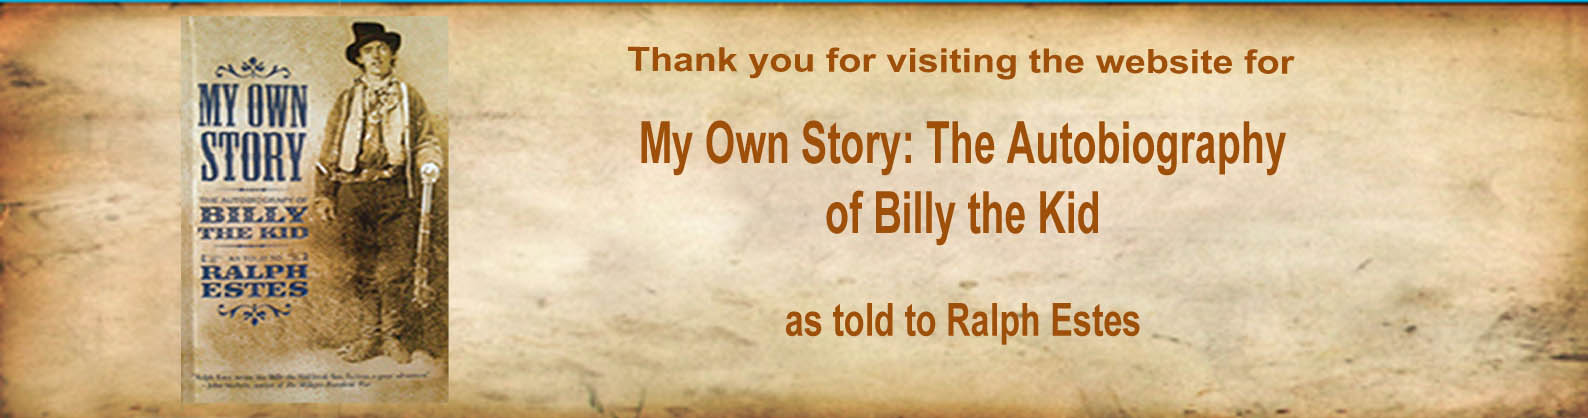 Welcome to My Own Story: The Autobiography of Billy the Kid website